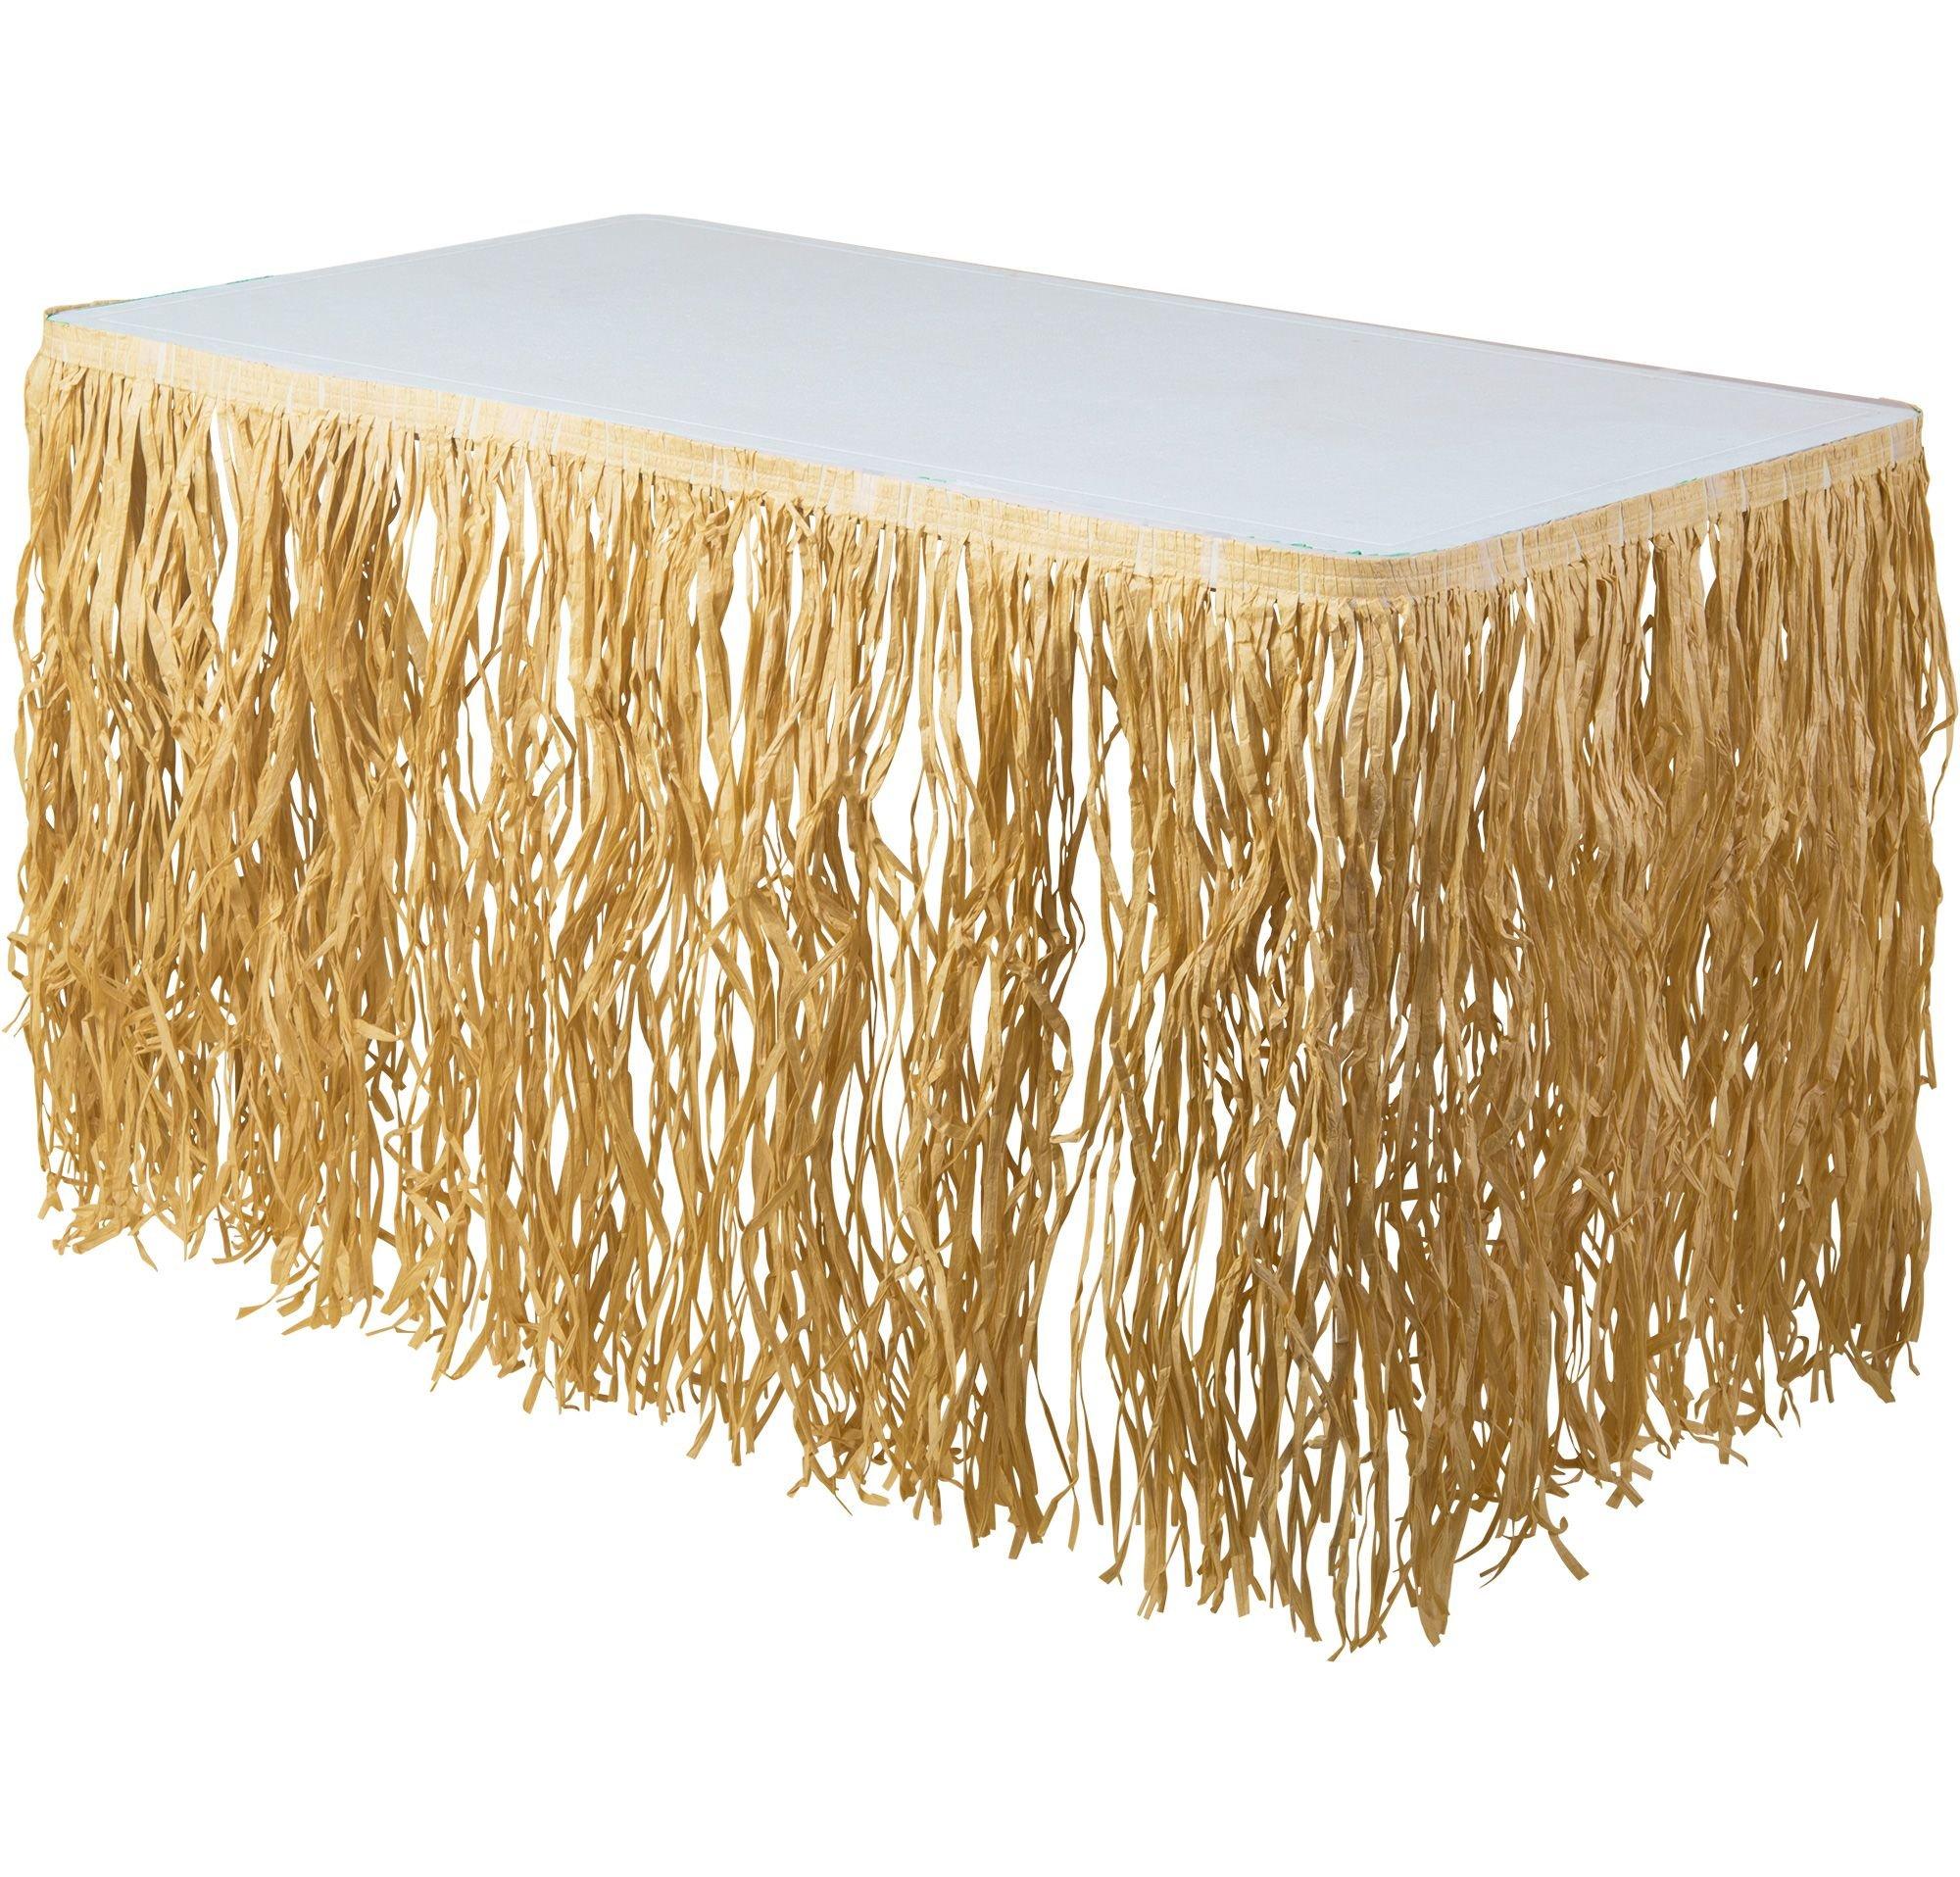 Tan Raffia Grass Fringe Table Skirt 9ft X 28in Party City